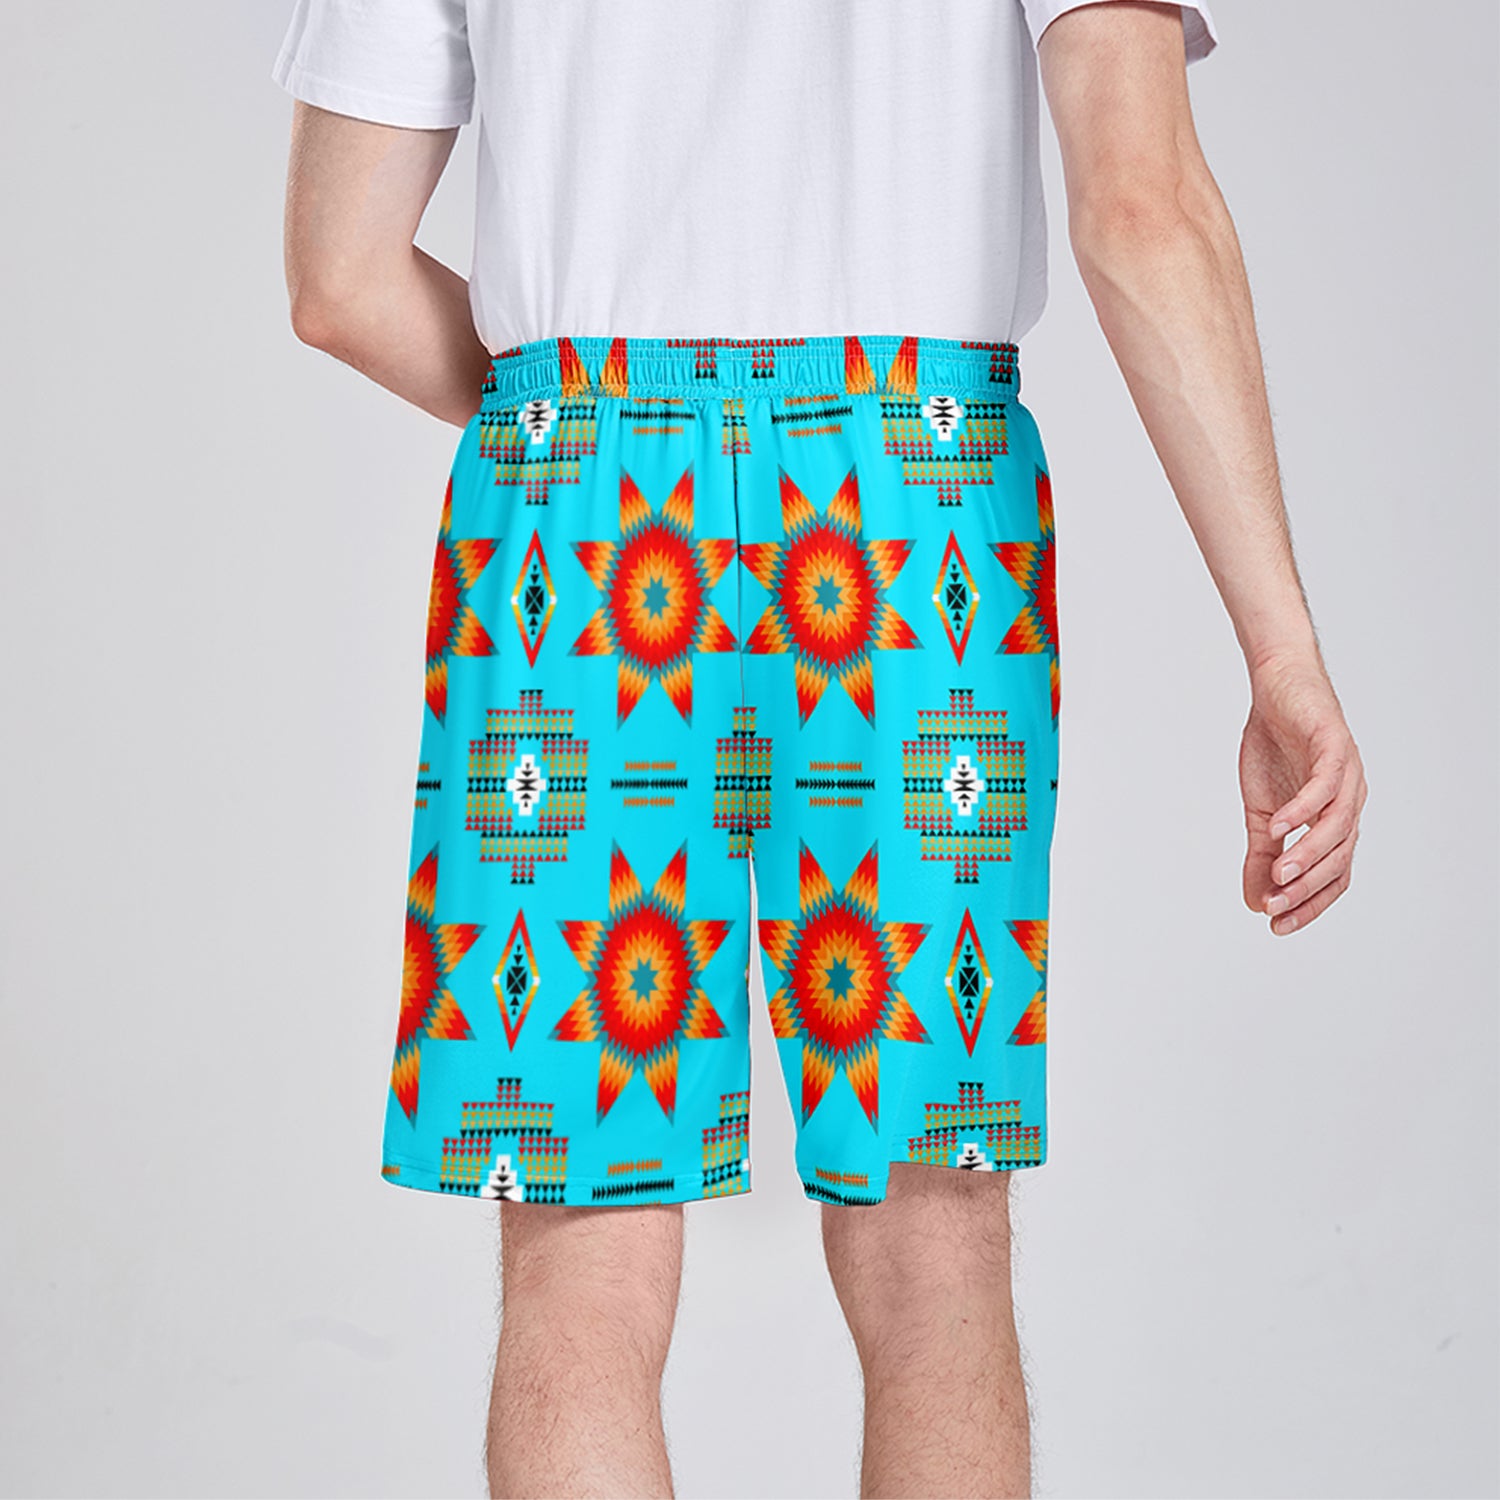 Rising Star Harvest Moon Athletic Shorts with Pockets